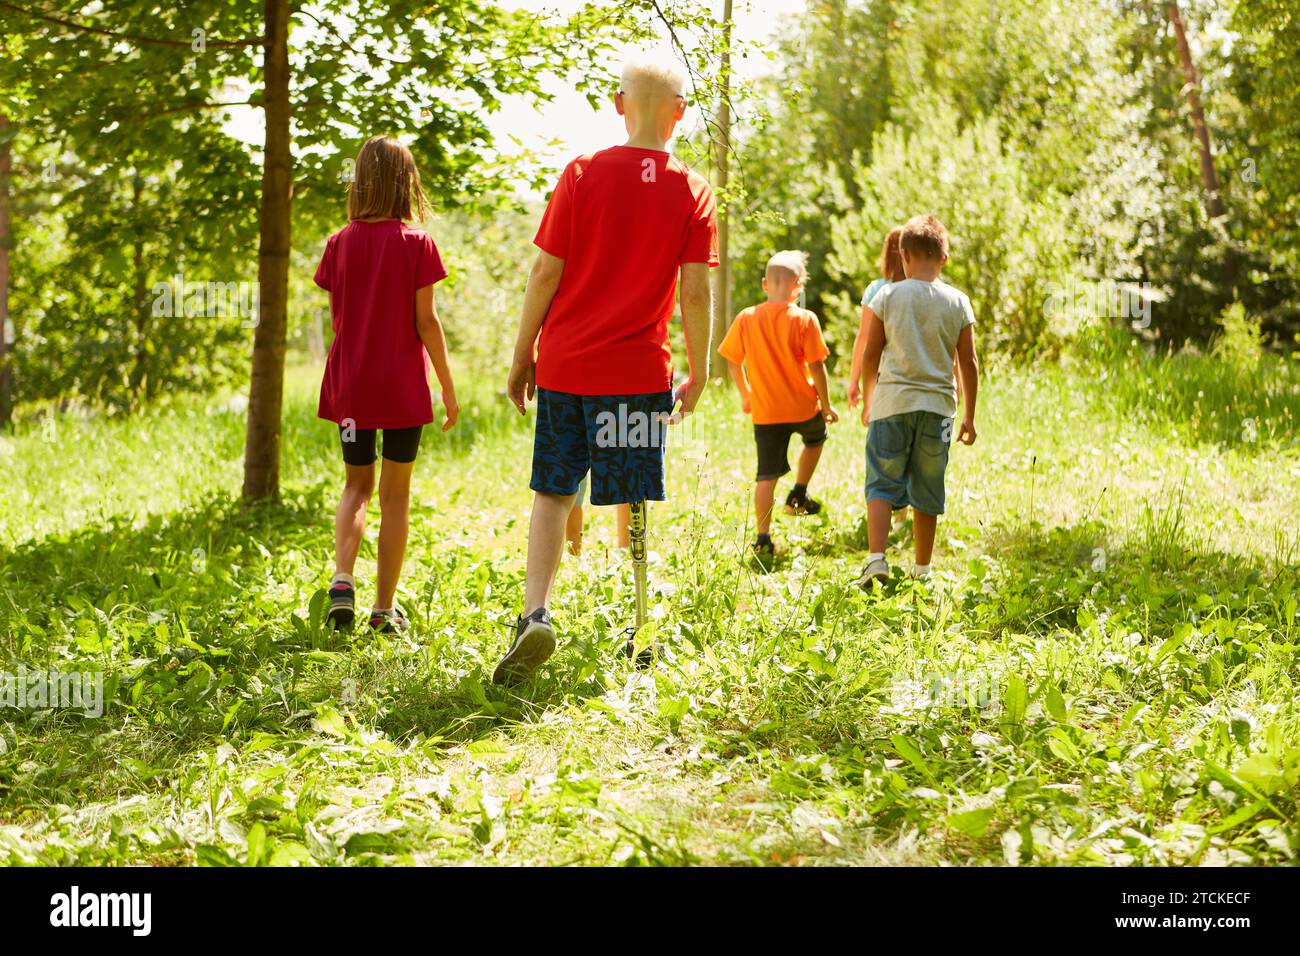 Rear view full length of handicapped boy walking with friends on grass at park Stock Photo